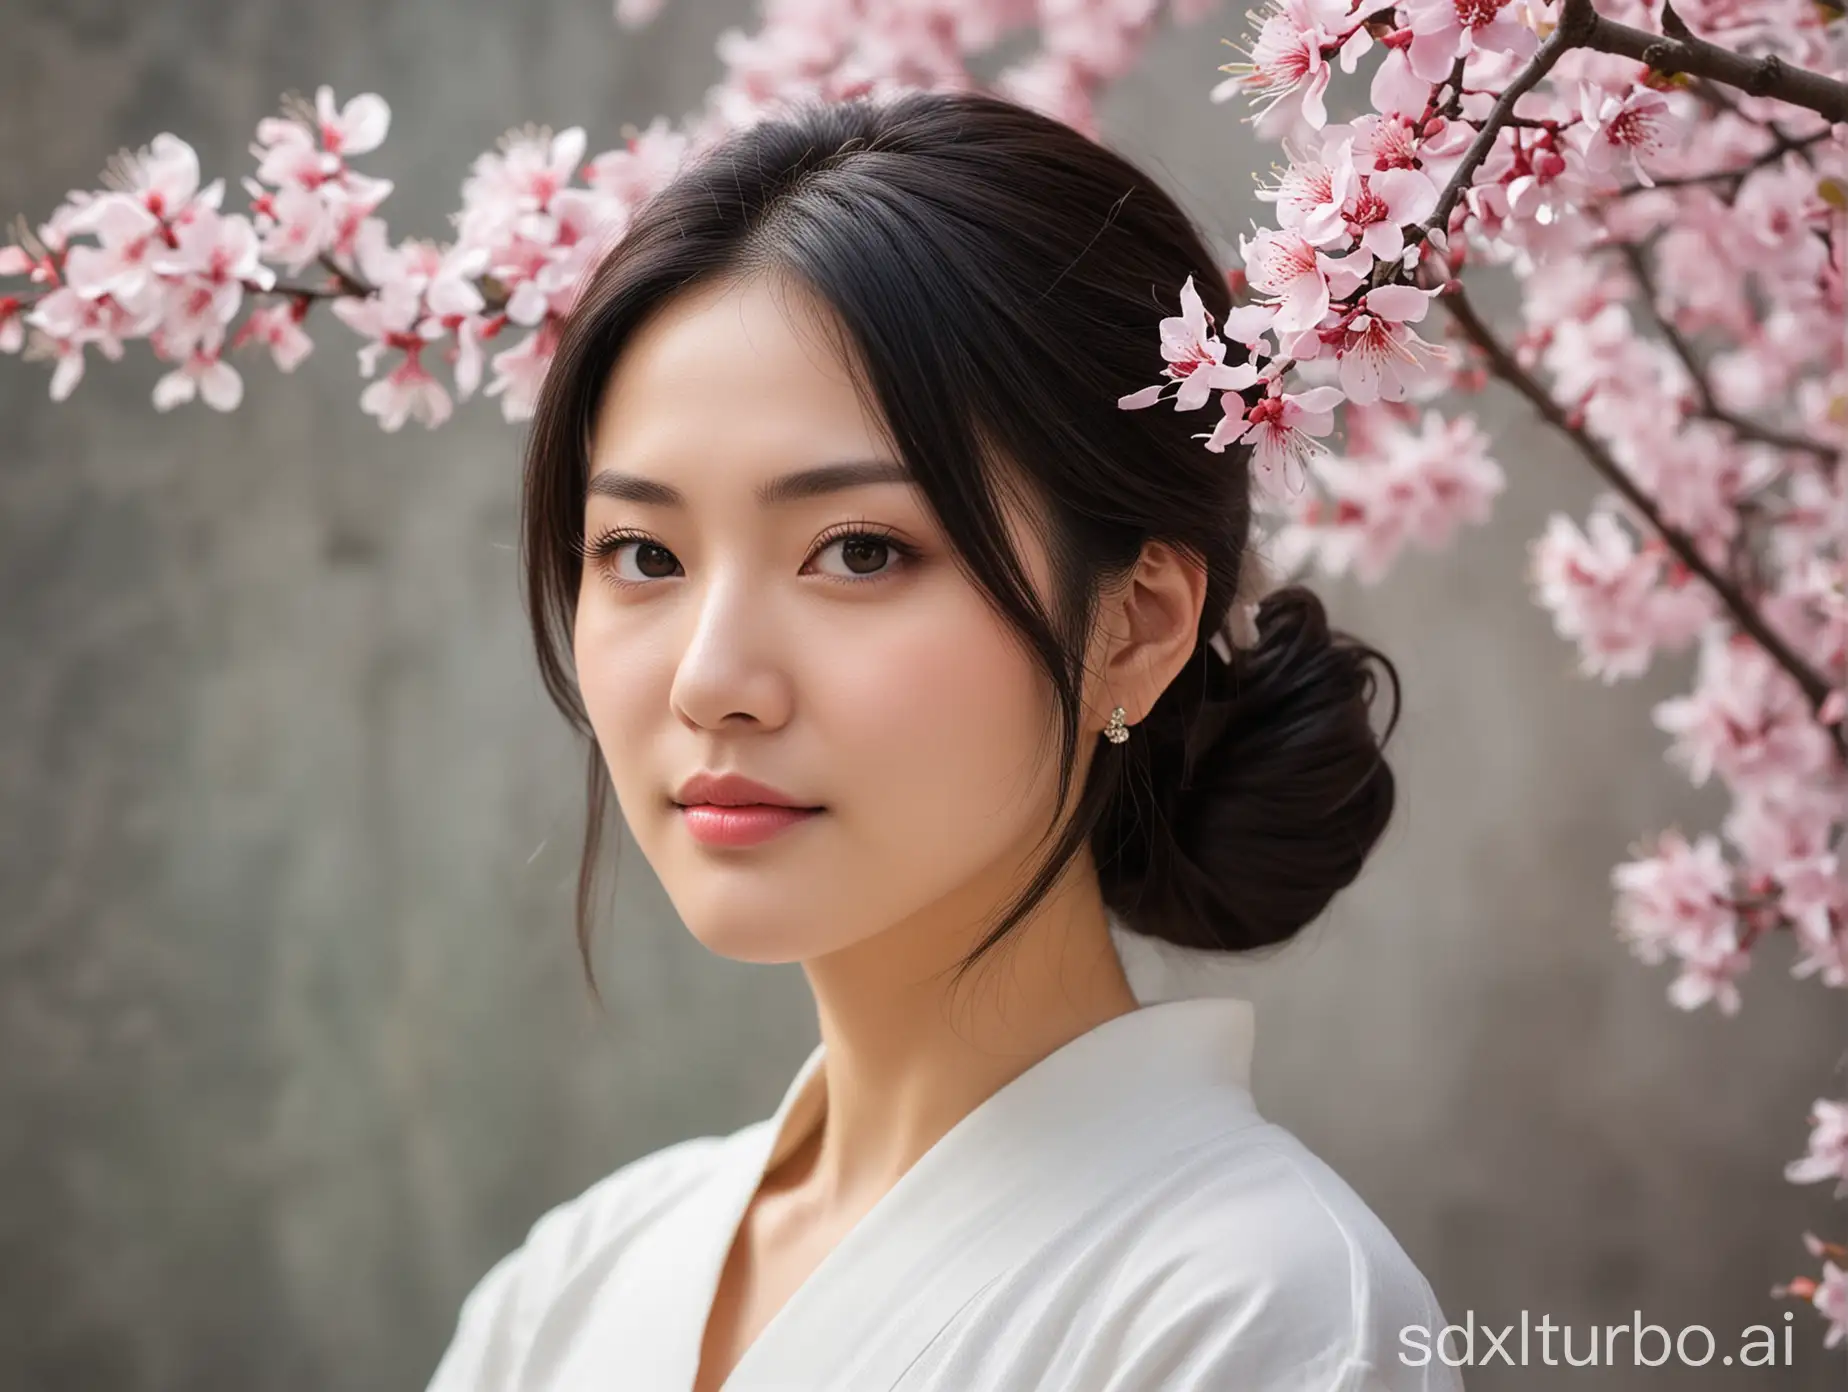 Elegant-Chinese-Woman-on-Dining-Table-with-Rose-Petals